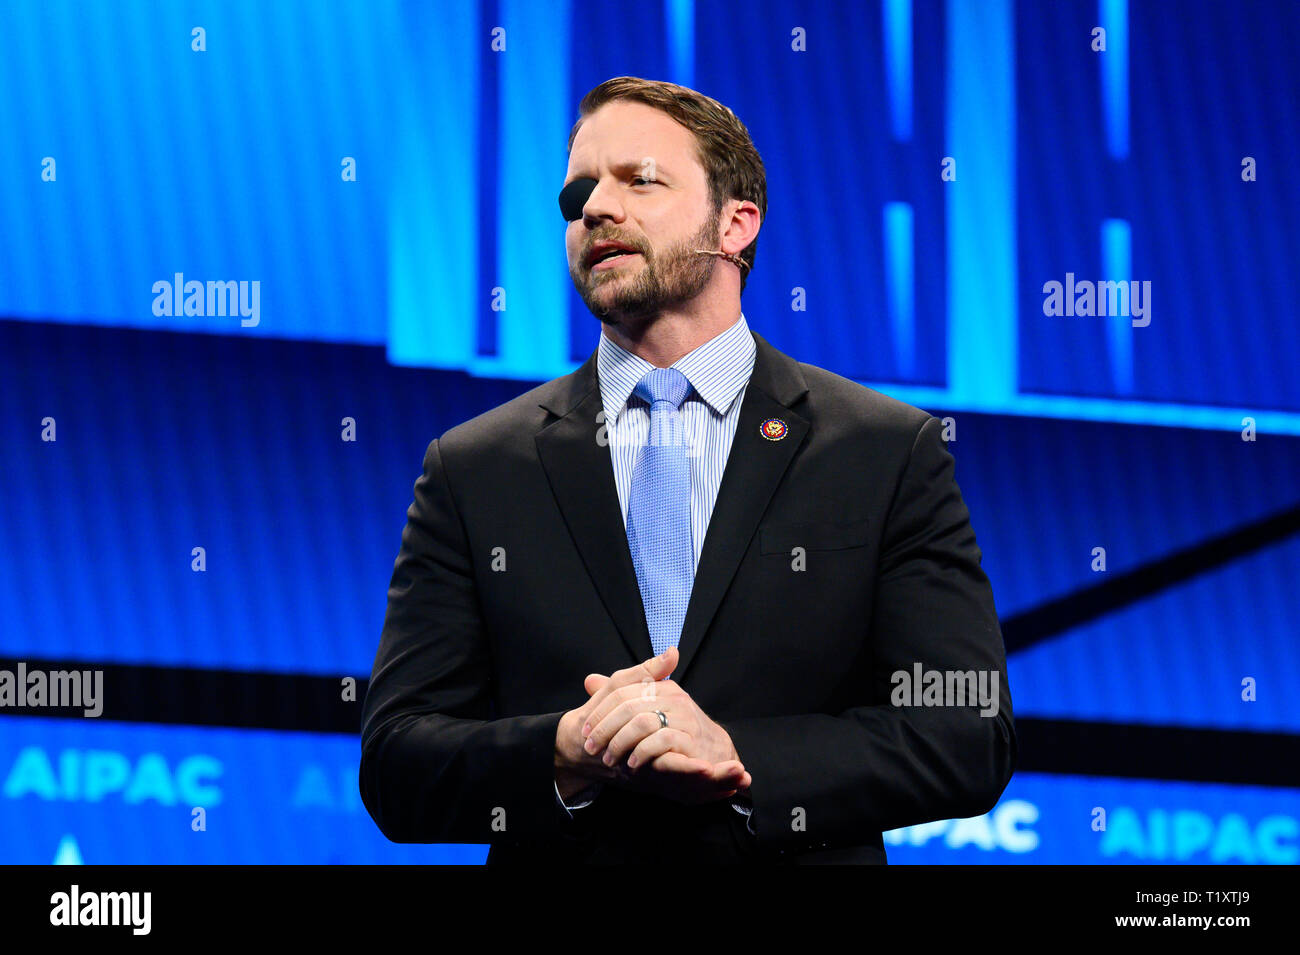 U.S. Representative Dan Crenshaw (R-TX) seen speaking during the American Israel Public Affairs Committee (AIPAC) Policy Conference in Washington, DC. Stock Photo